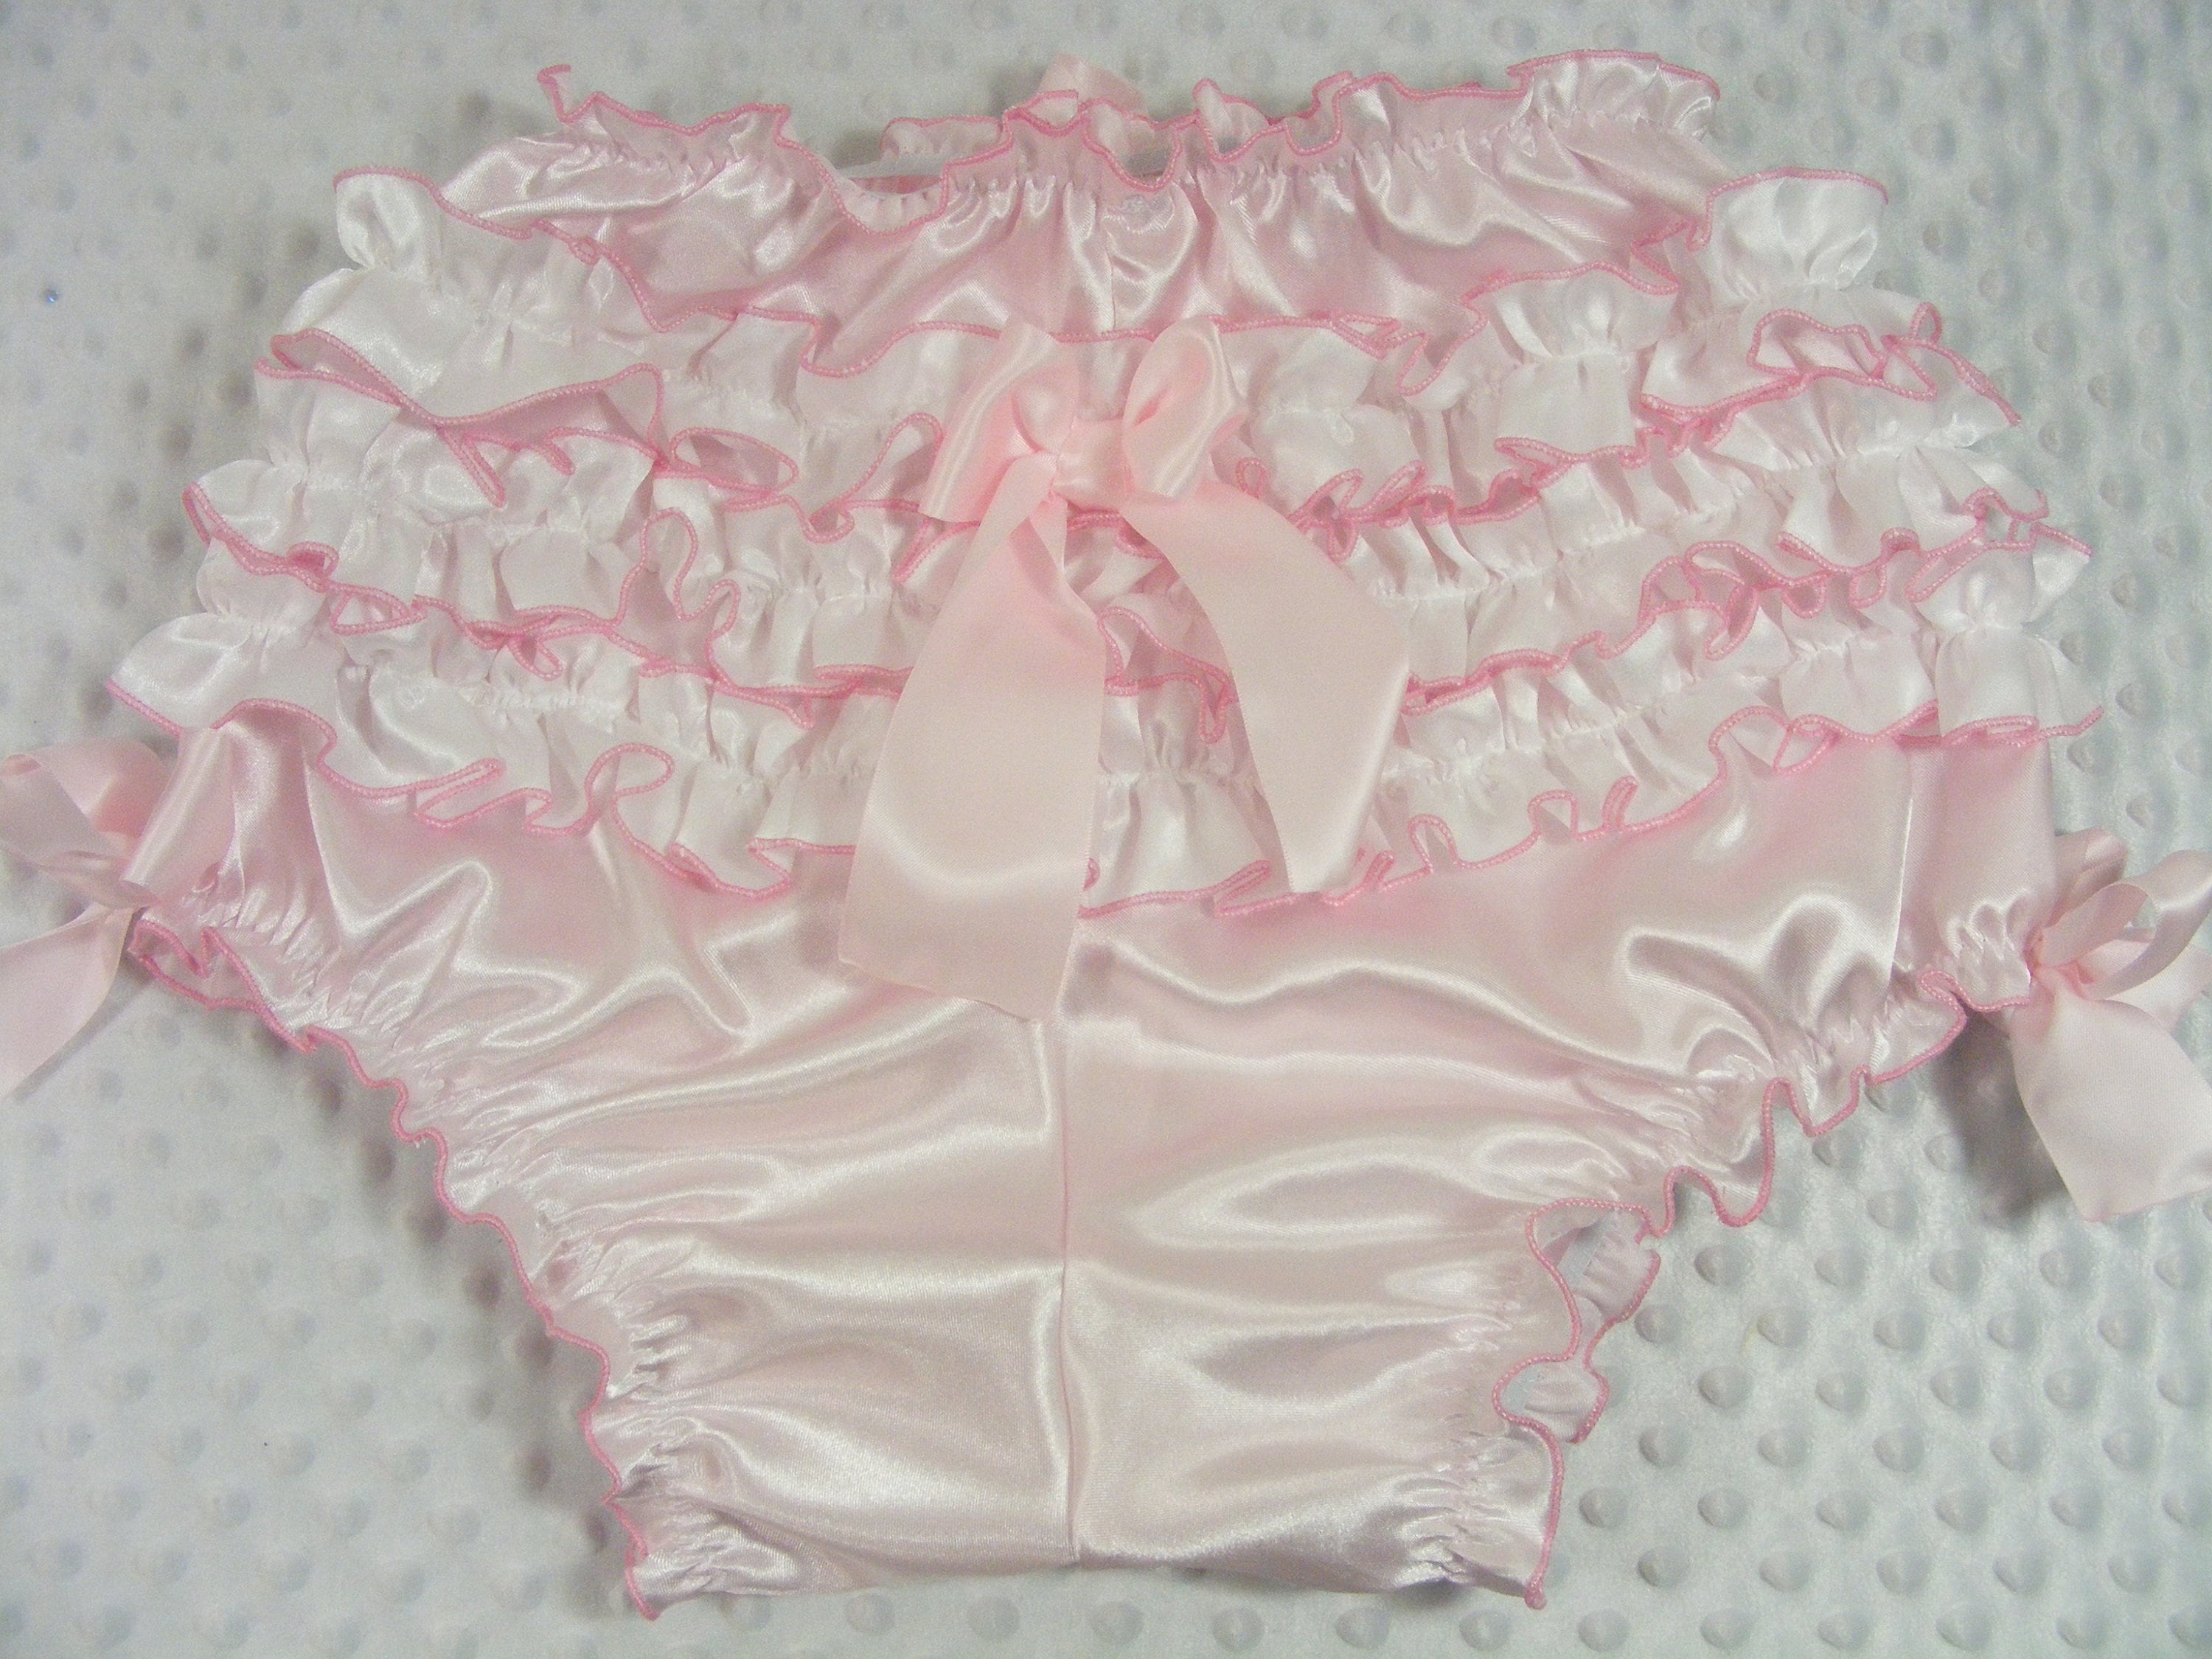 Sissy Adult Baby ABDL Pink Satin Diaper Cover Nappy Lacy Extra Frilly  Unlined Pvc, Lined, Waterproof Lining Bloomers Abdl Cosplay 